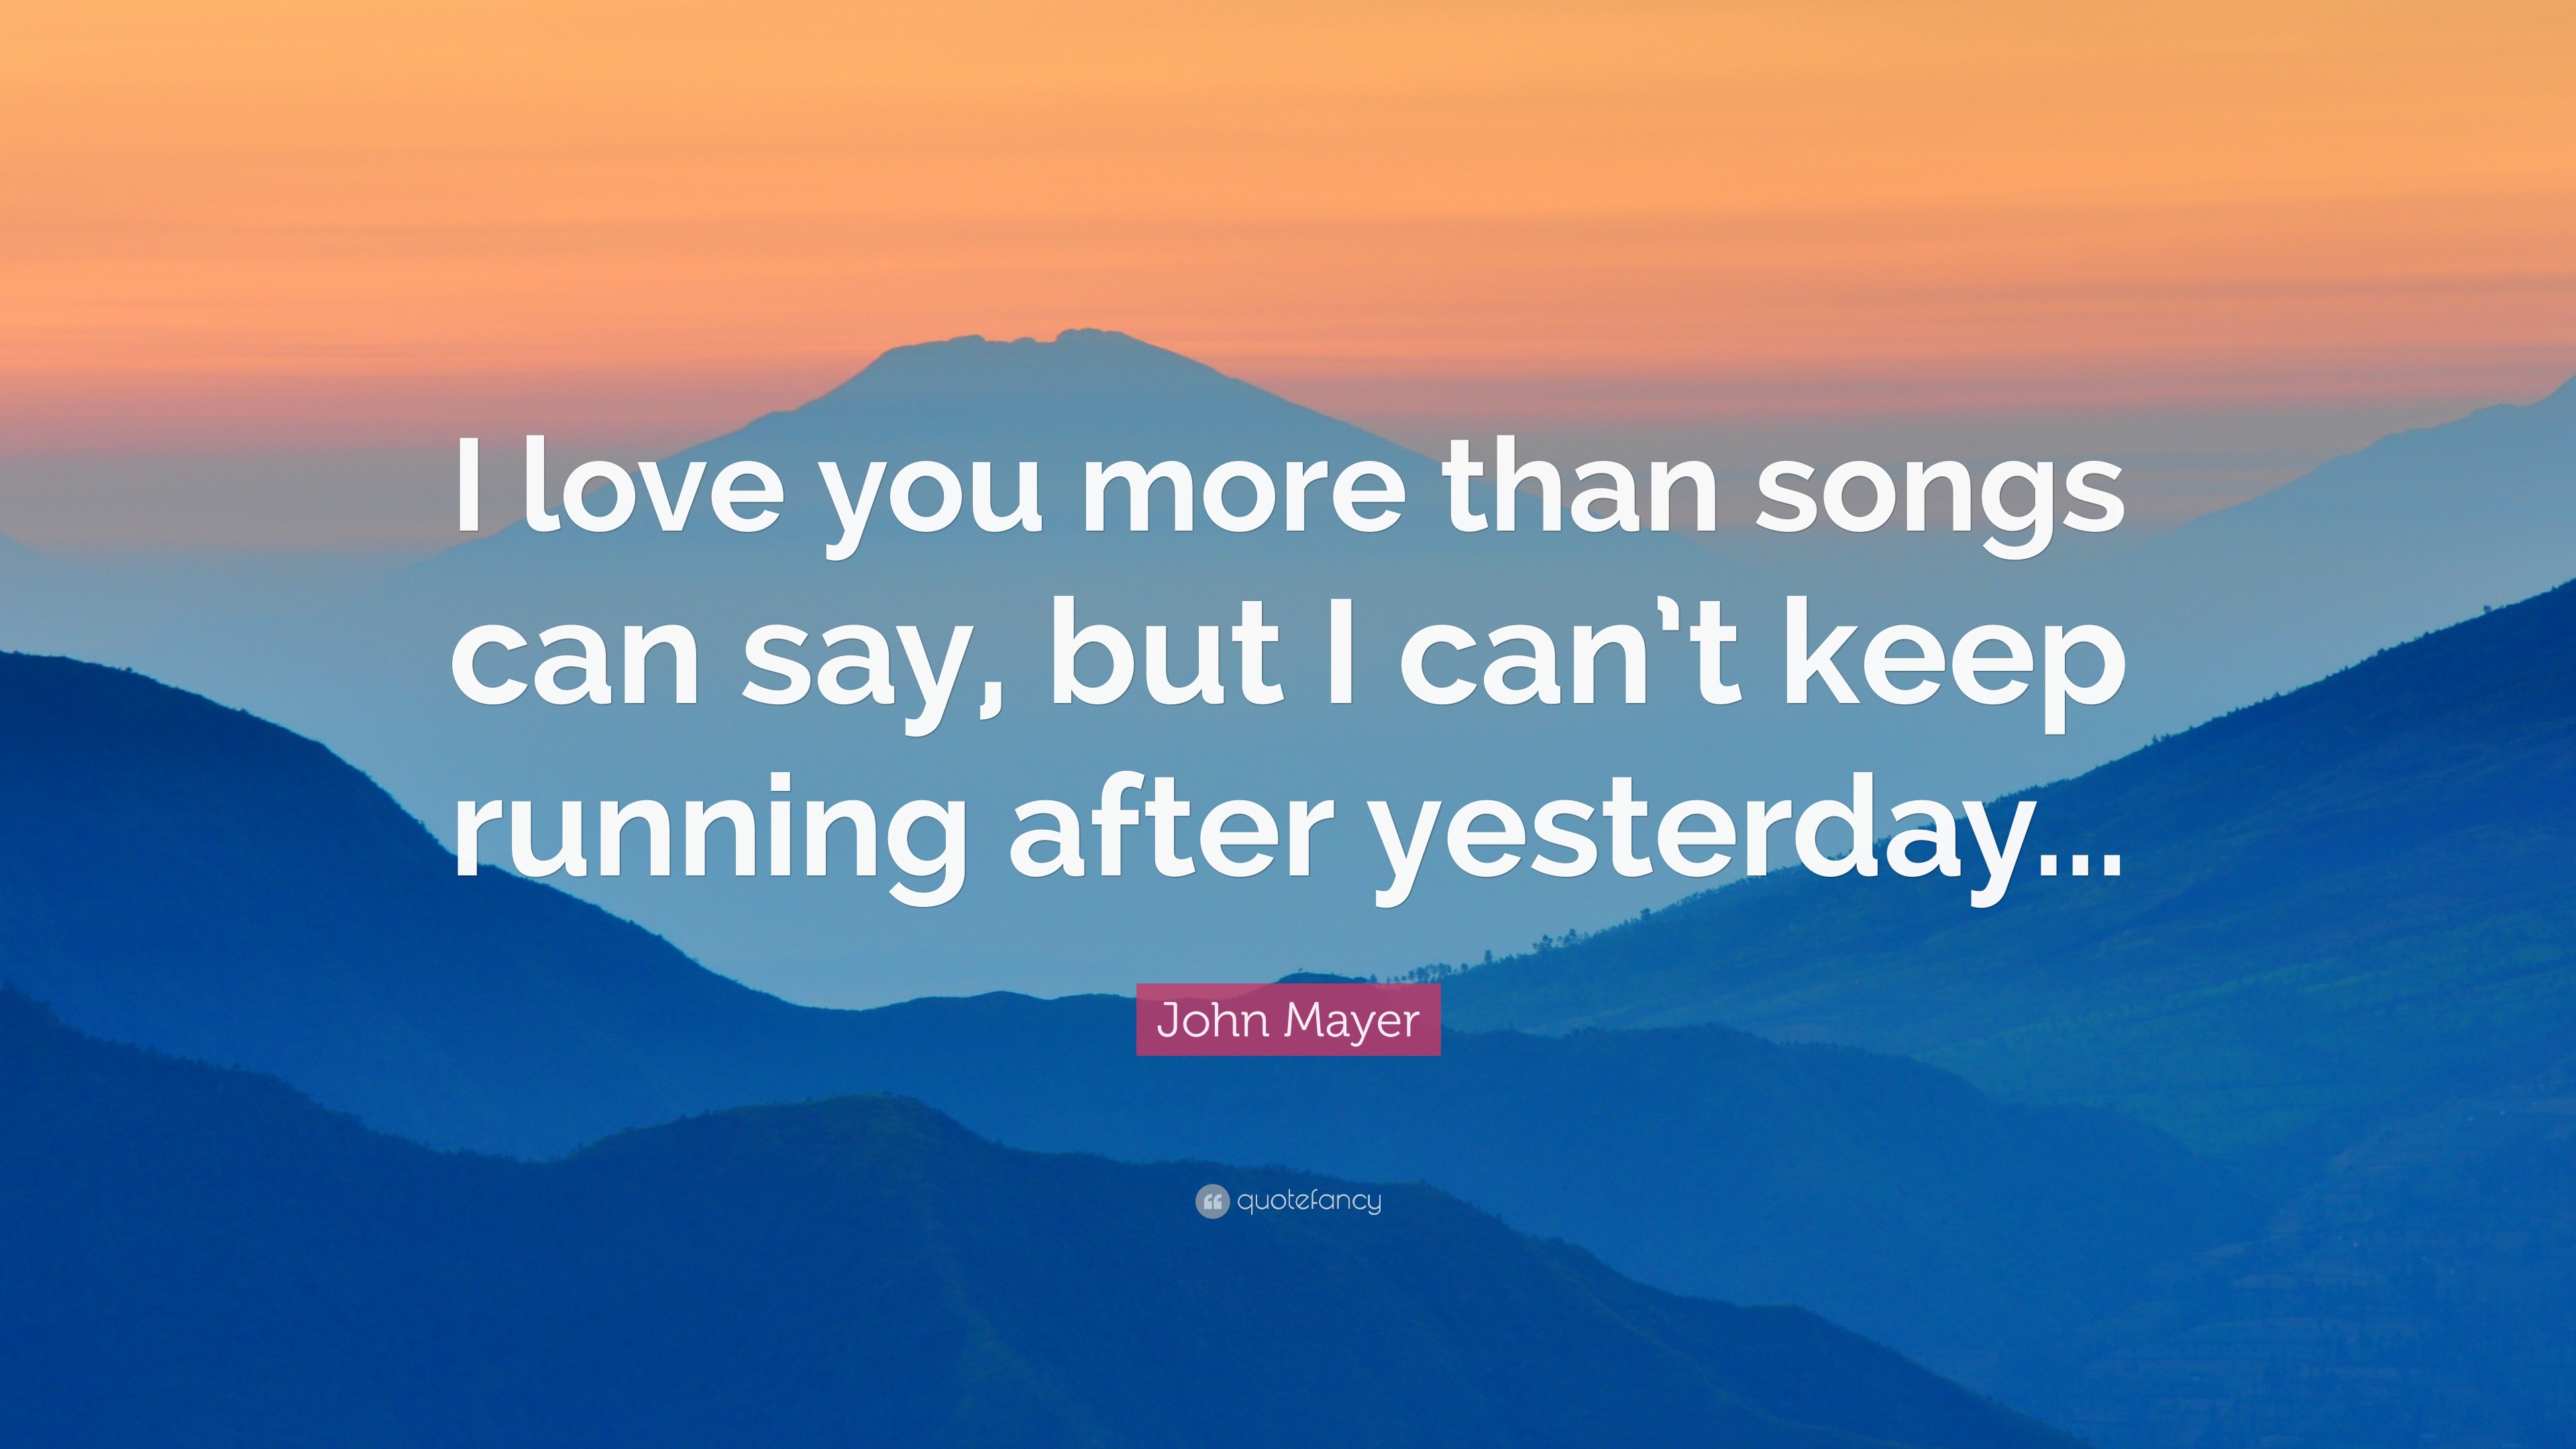 John Mayer Quote “I love you more than songs can say, but